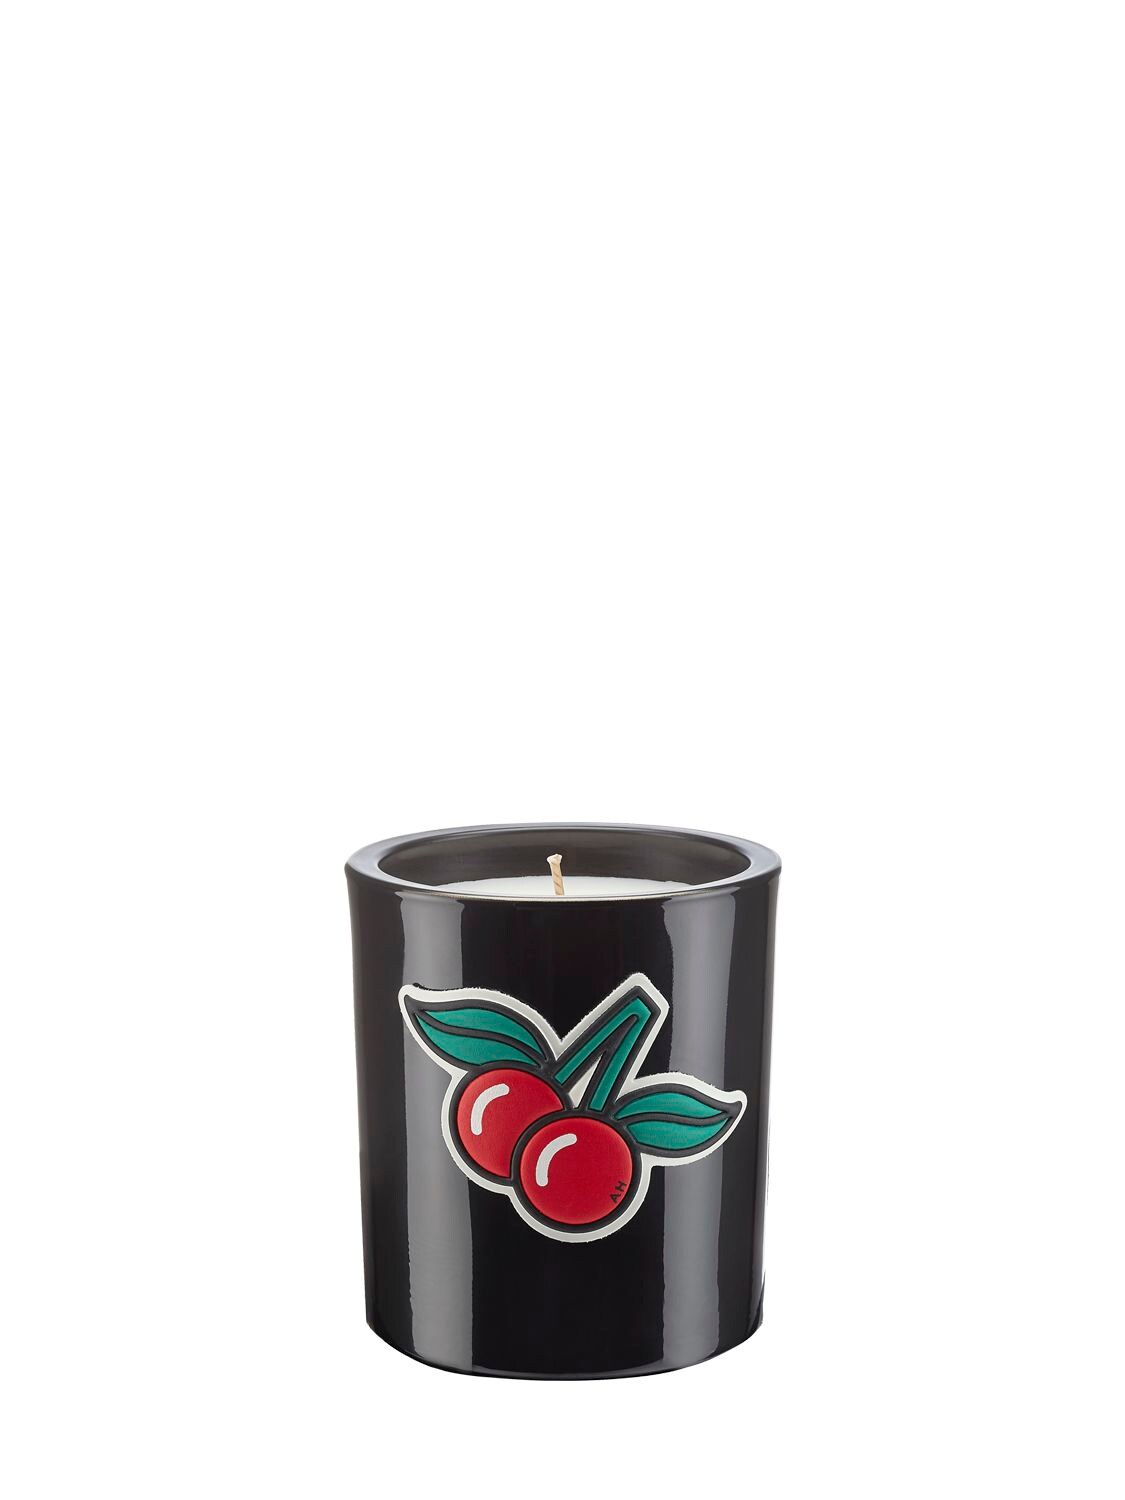 Anya Hindmarch Smells 175gr Lip Balm Scented Candle In Black